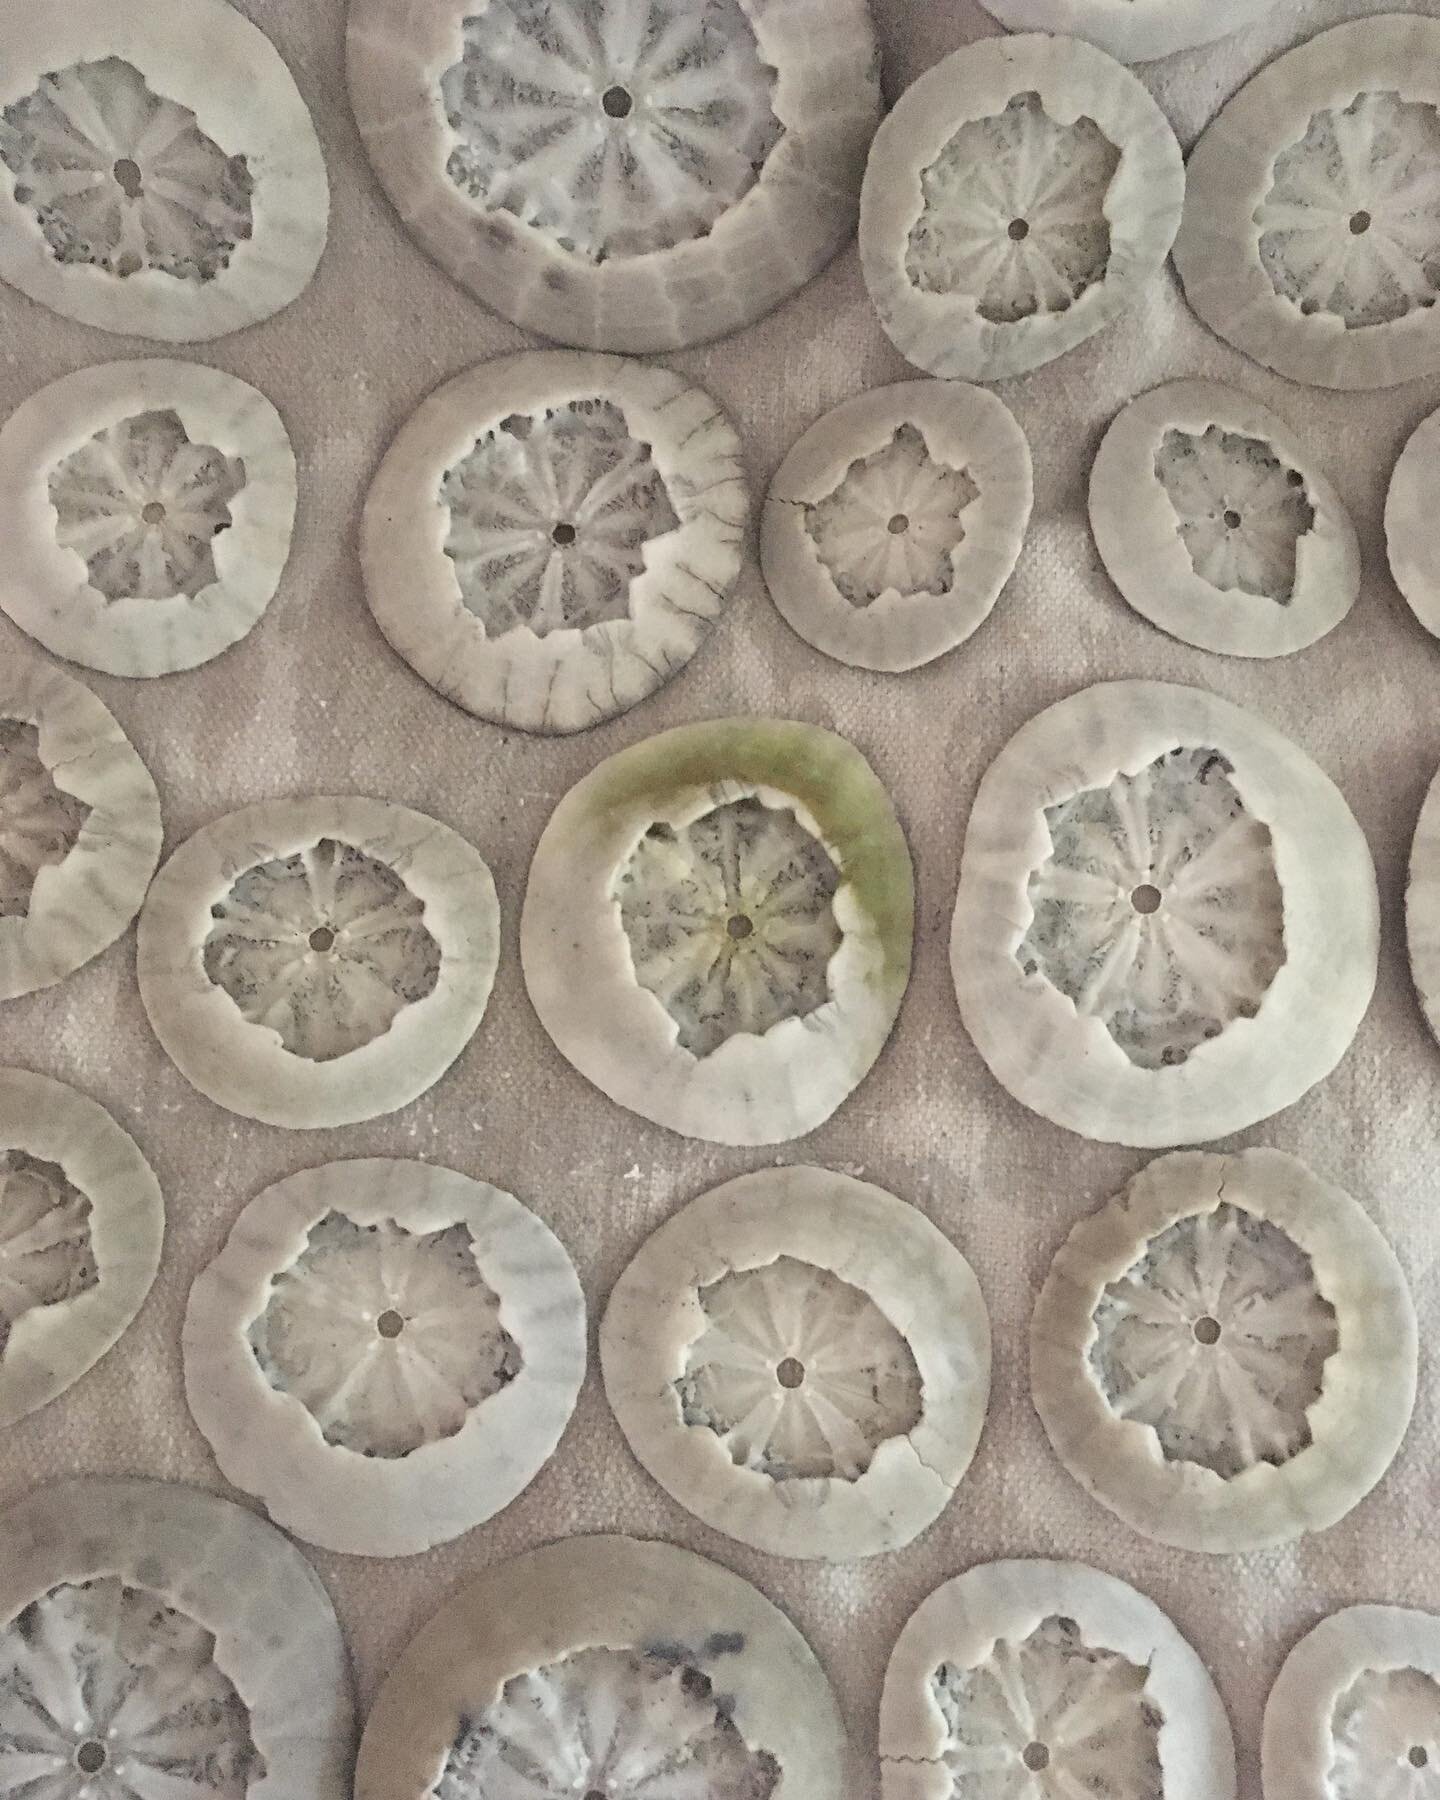 43 poor smashed sand dollars that I collected from the WA coast on Wednesday. With their top part broken the lovely inside is surprisingly revealed. All of these were killed in the ocean and washed on shore in this condition. There were some that we 